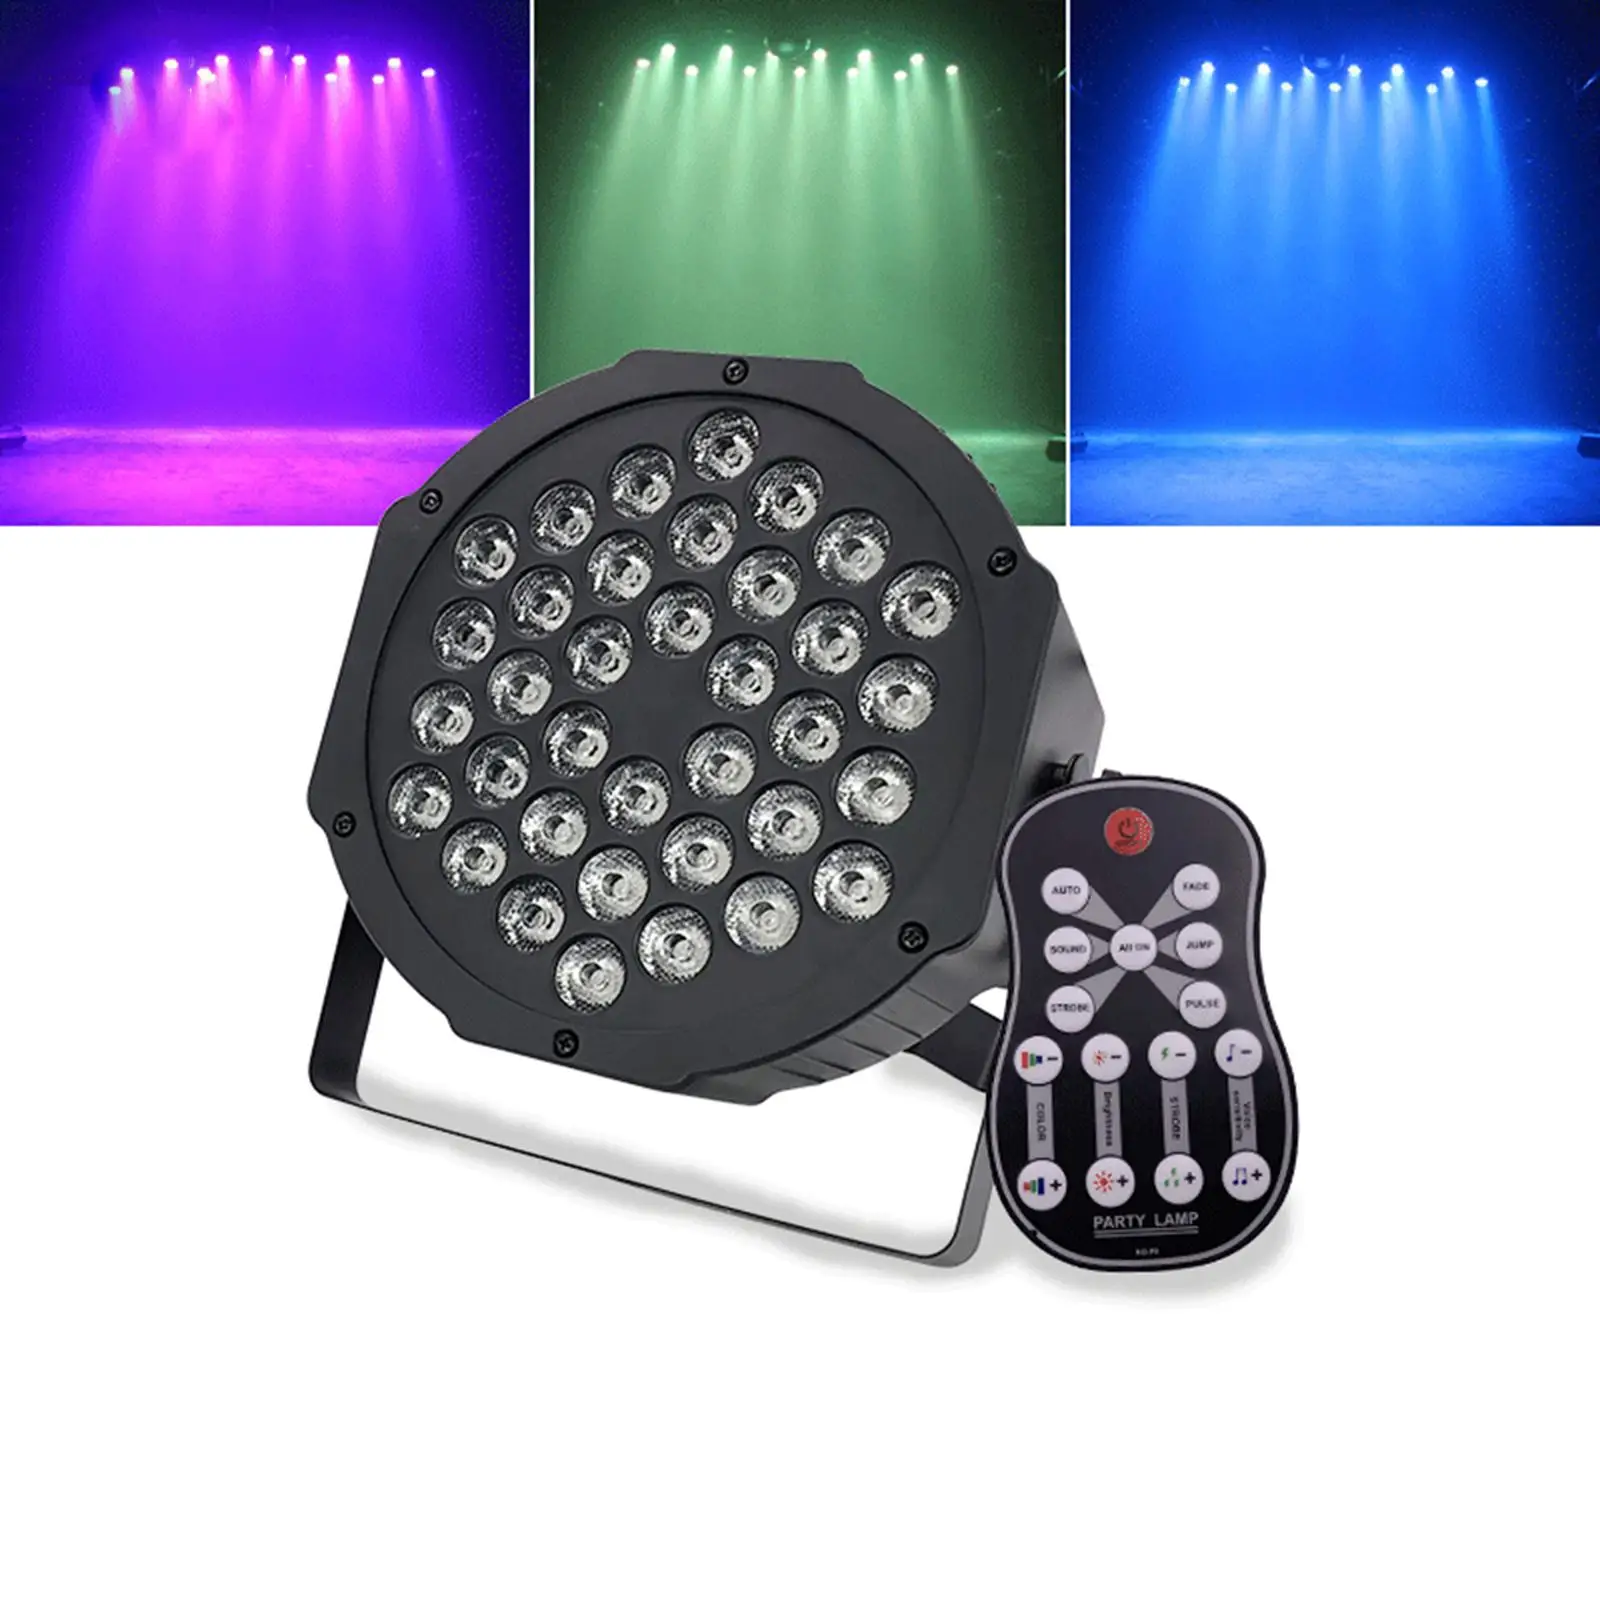 stage Lamp Super Bright Portable Professional Novelty Waterproof Remote Control for Bedroom Home KTV Party concert